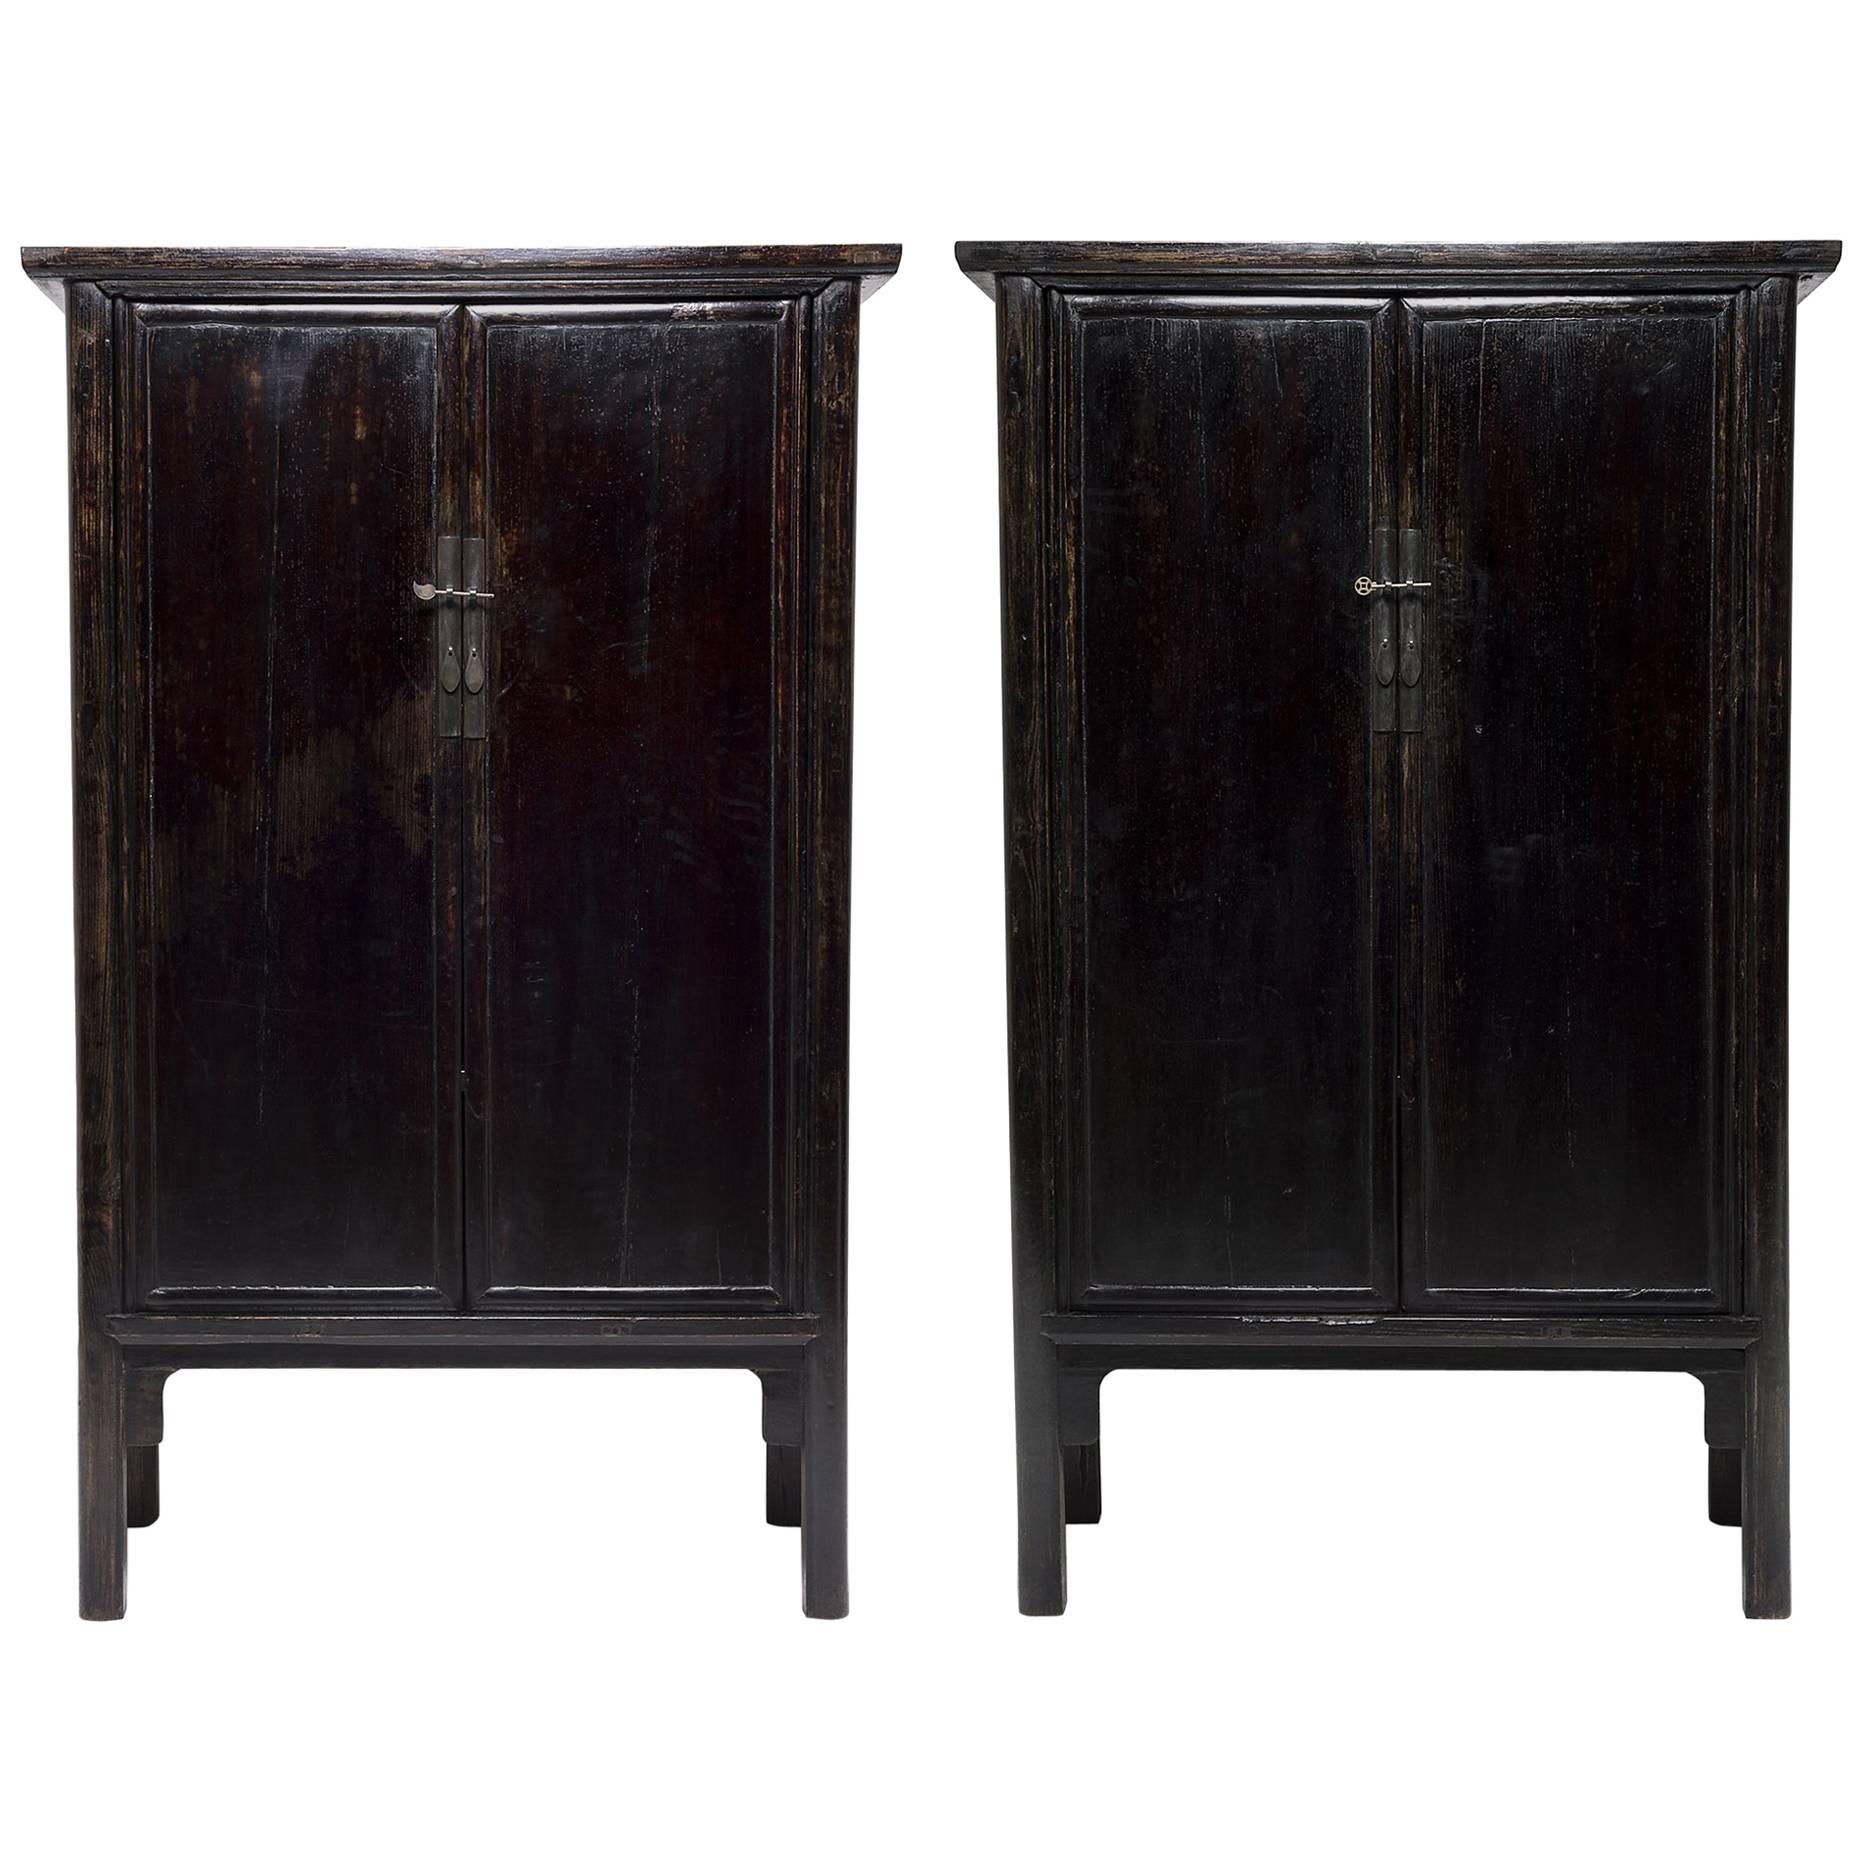 Pair of Chinese Black Lacquer Noodle Cabinets, c. 1800